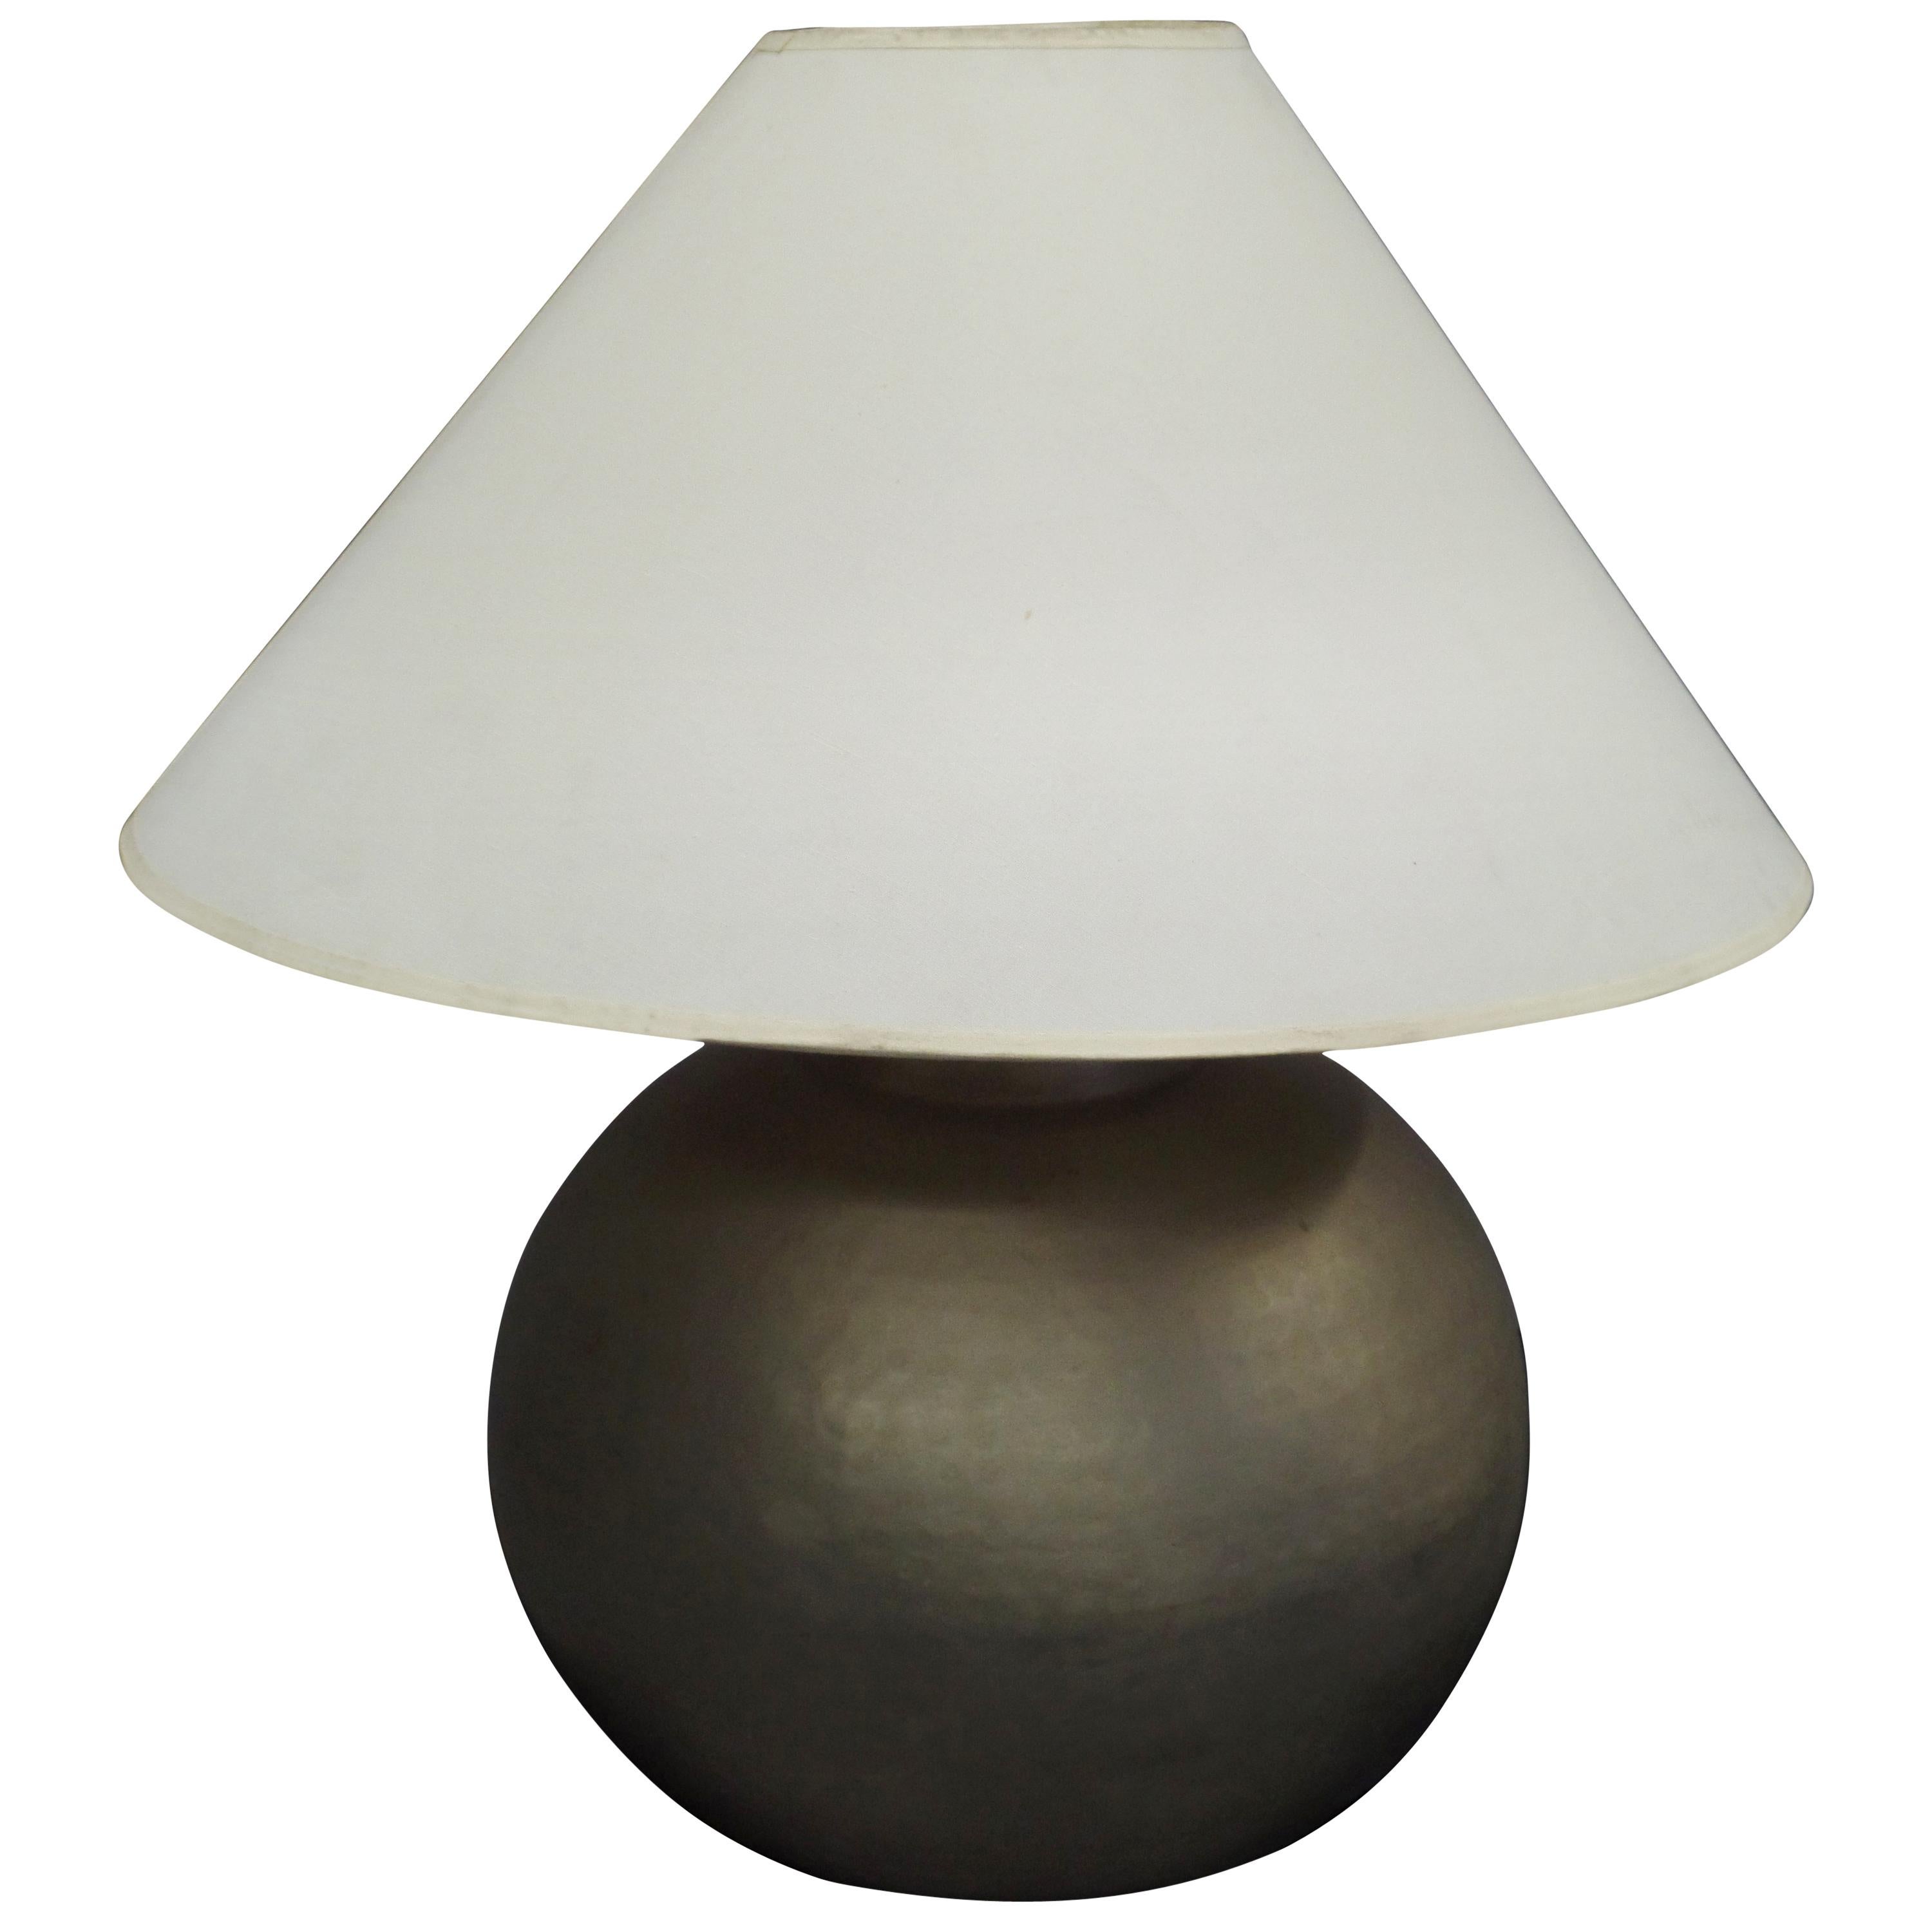 Elegant pair of French midcentury hand-hammered solid brass table lamps in the spirit of Jean-Michel Frank in a circular form with a sober, modern spirit. The pieces are finished in matte nickel.

Base dimensions alone are H 14 x D 14. Shades are